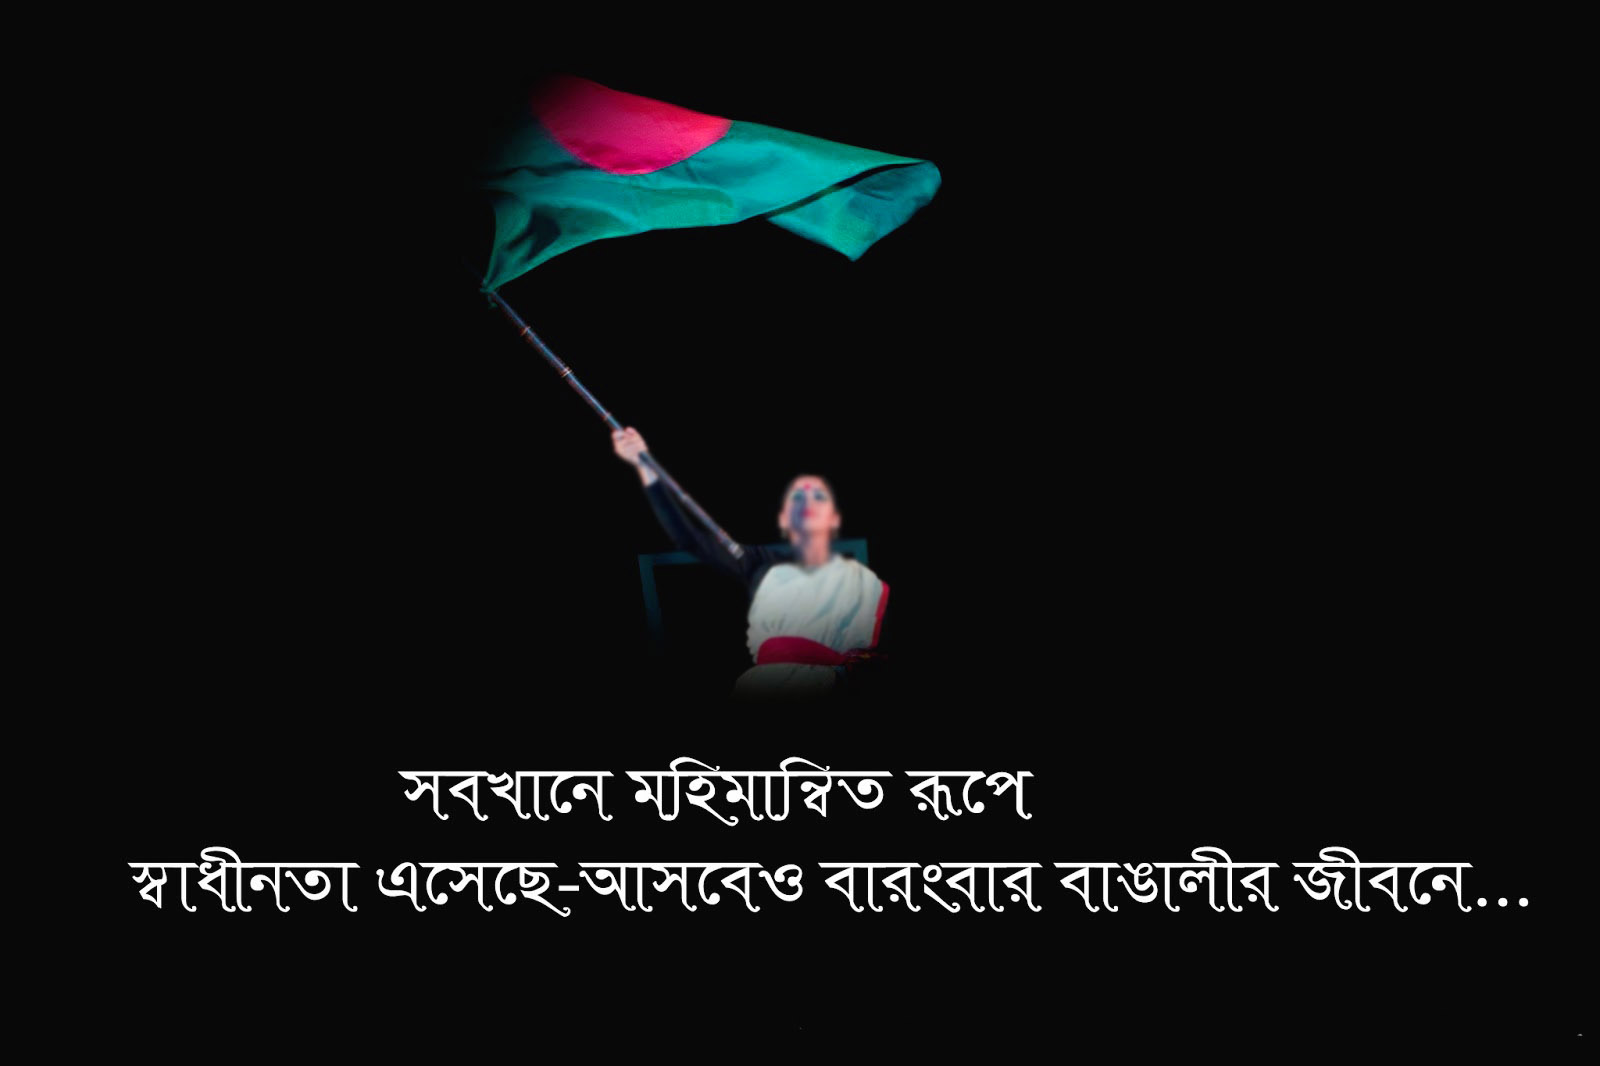 Independence Day 26 March Bangladesh Wallpaper 